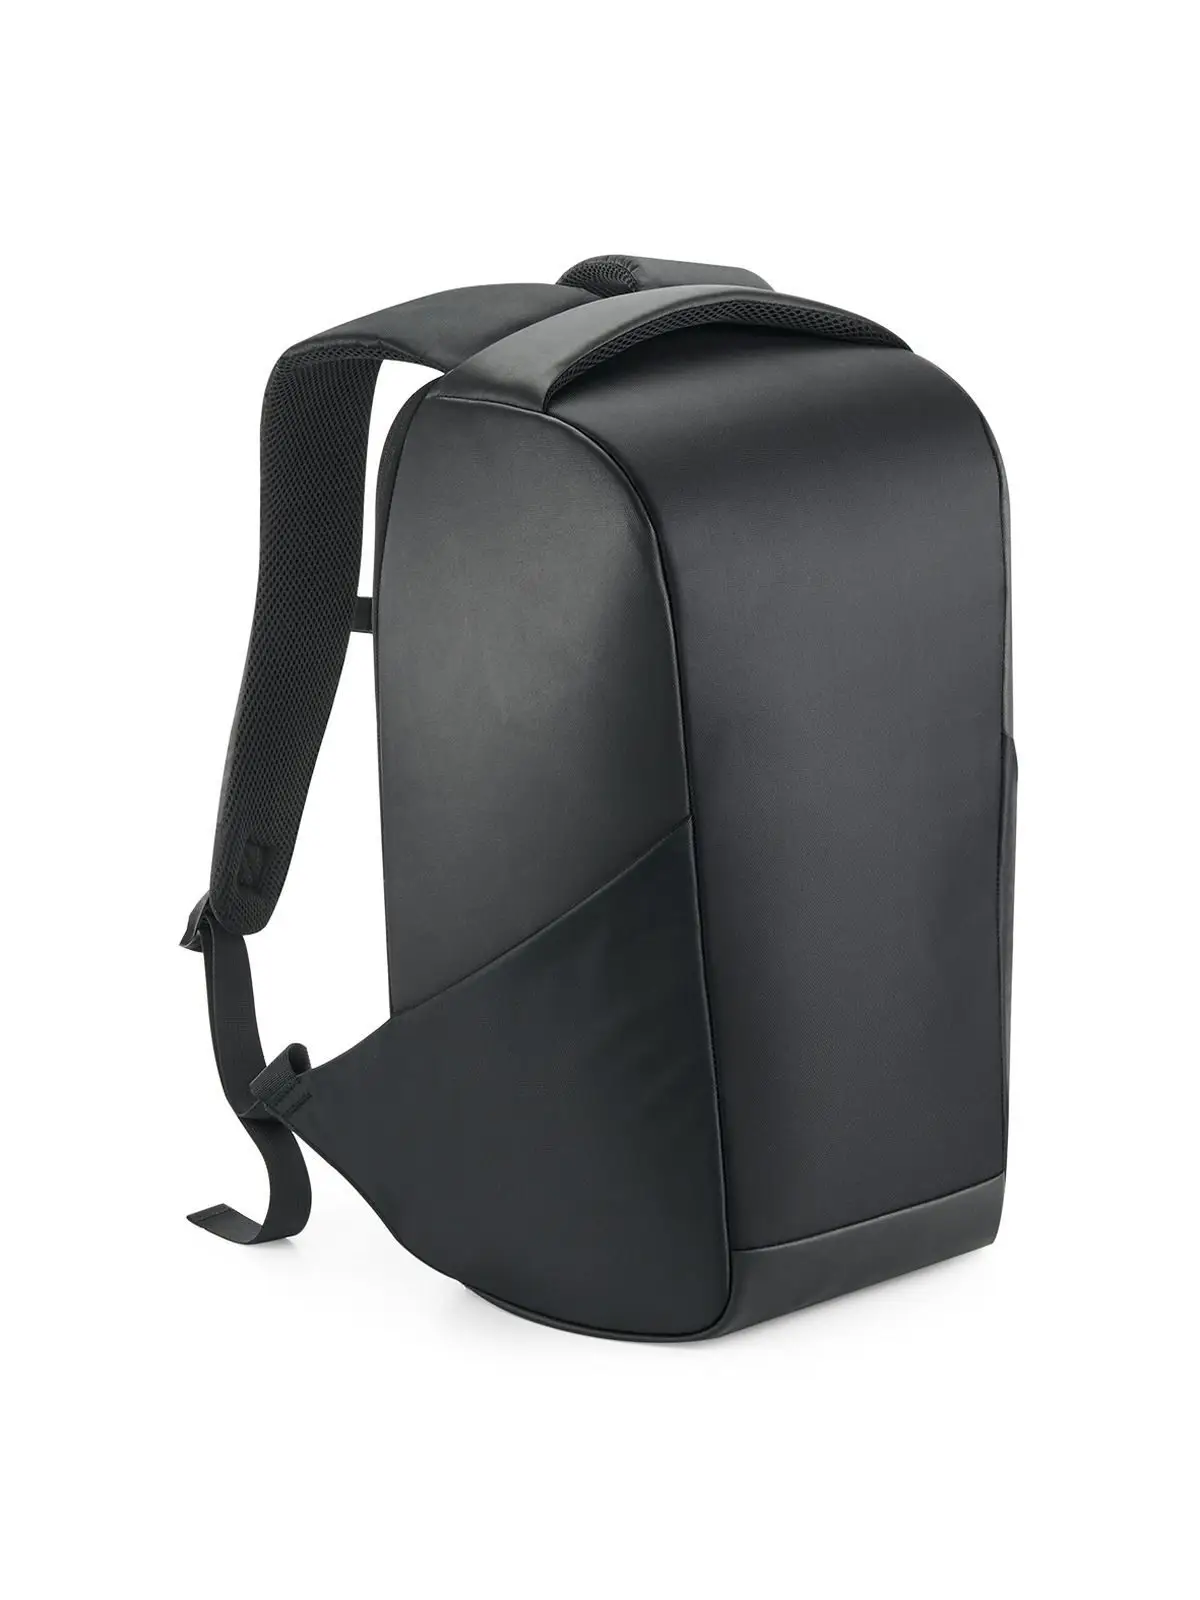 Project Charge Security Backpack